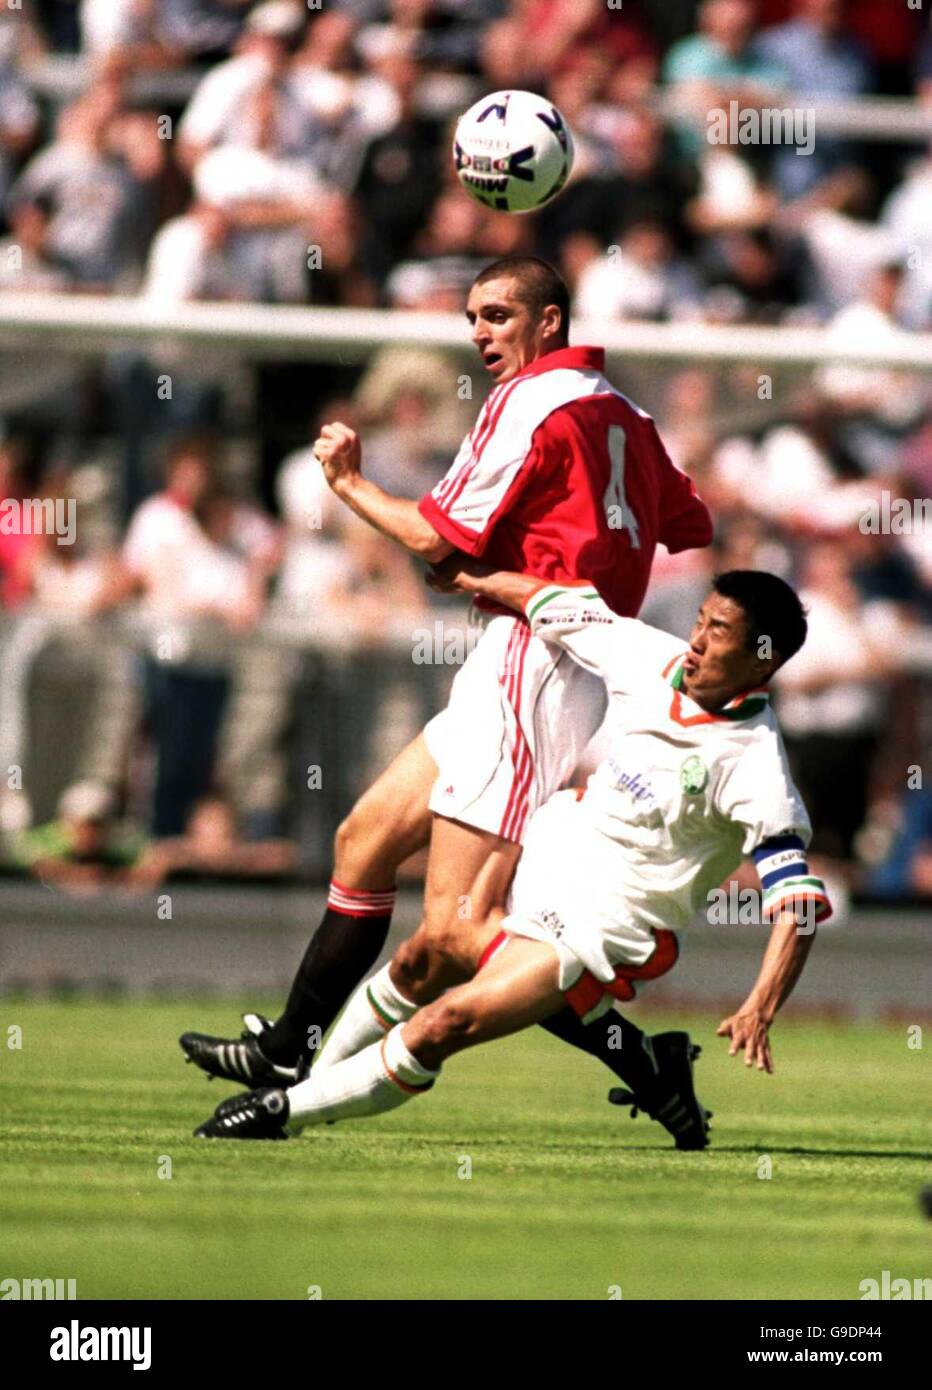 Soccer - Friendly - Fulham v India. India's Baichung Bhutia (r) dives in for a tackle on Fulham's Andy Melville (l) Stock Photo